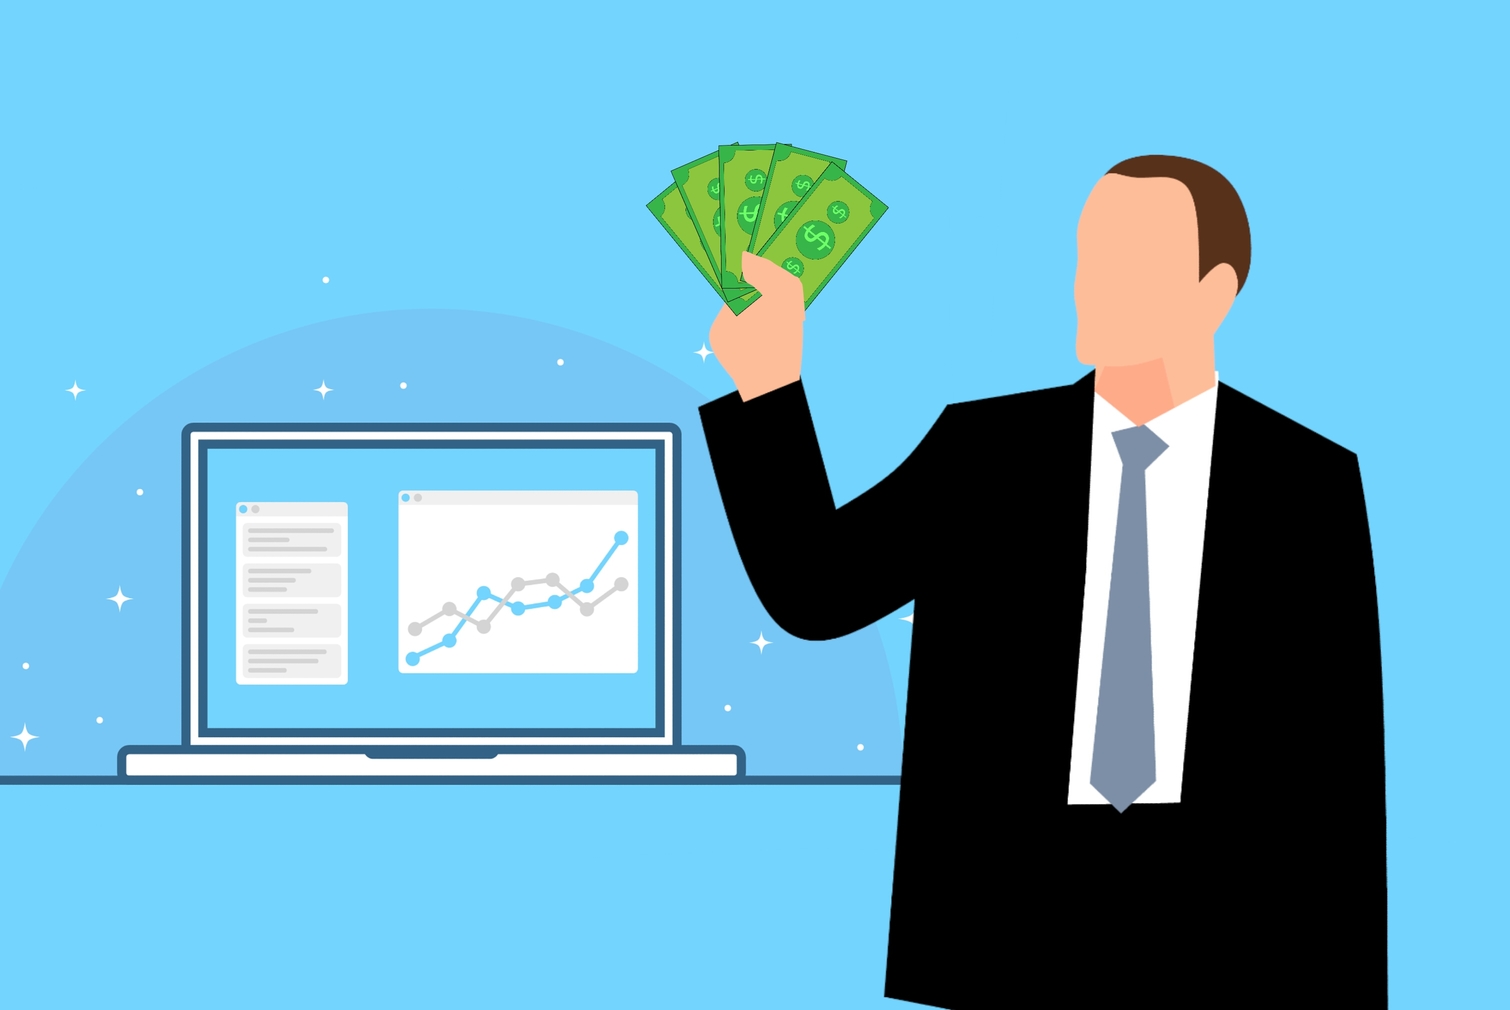 Man holding a lot of money, and profit increase graph on the background